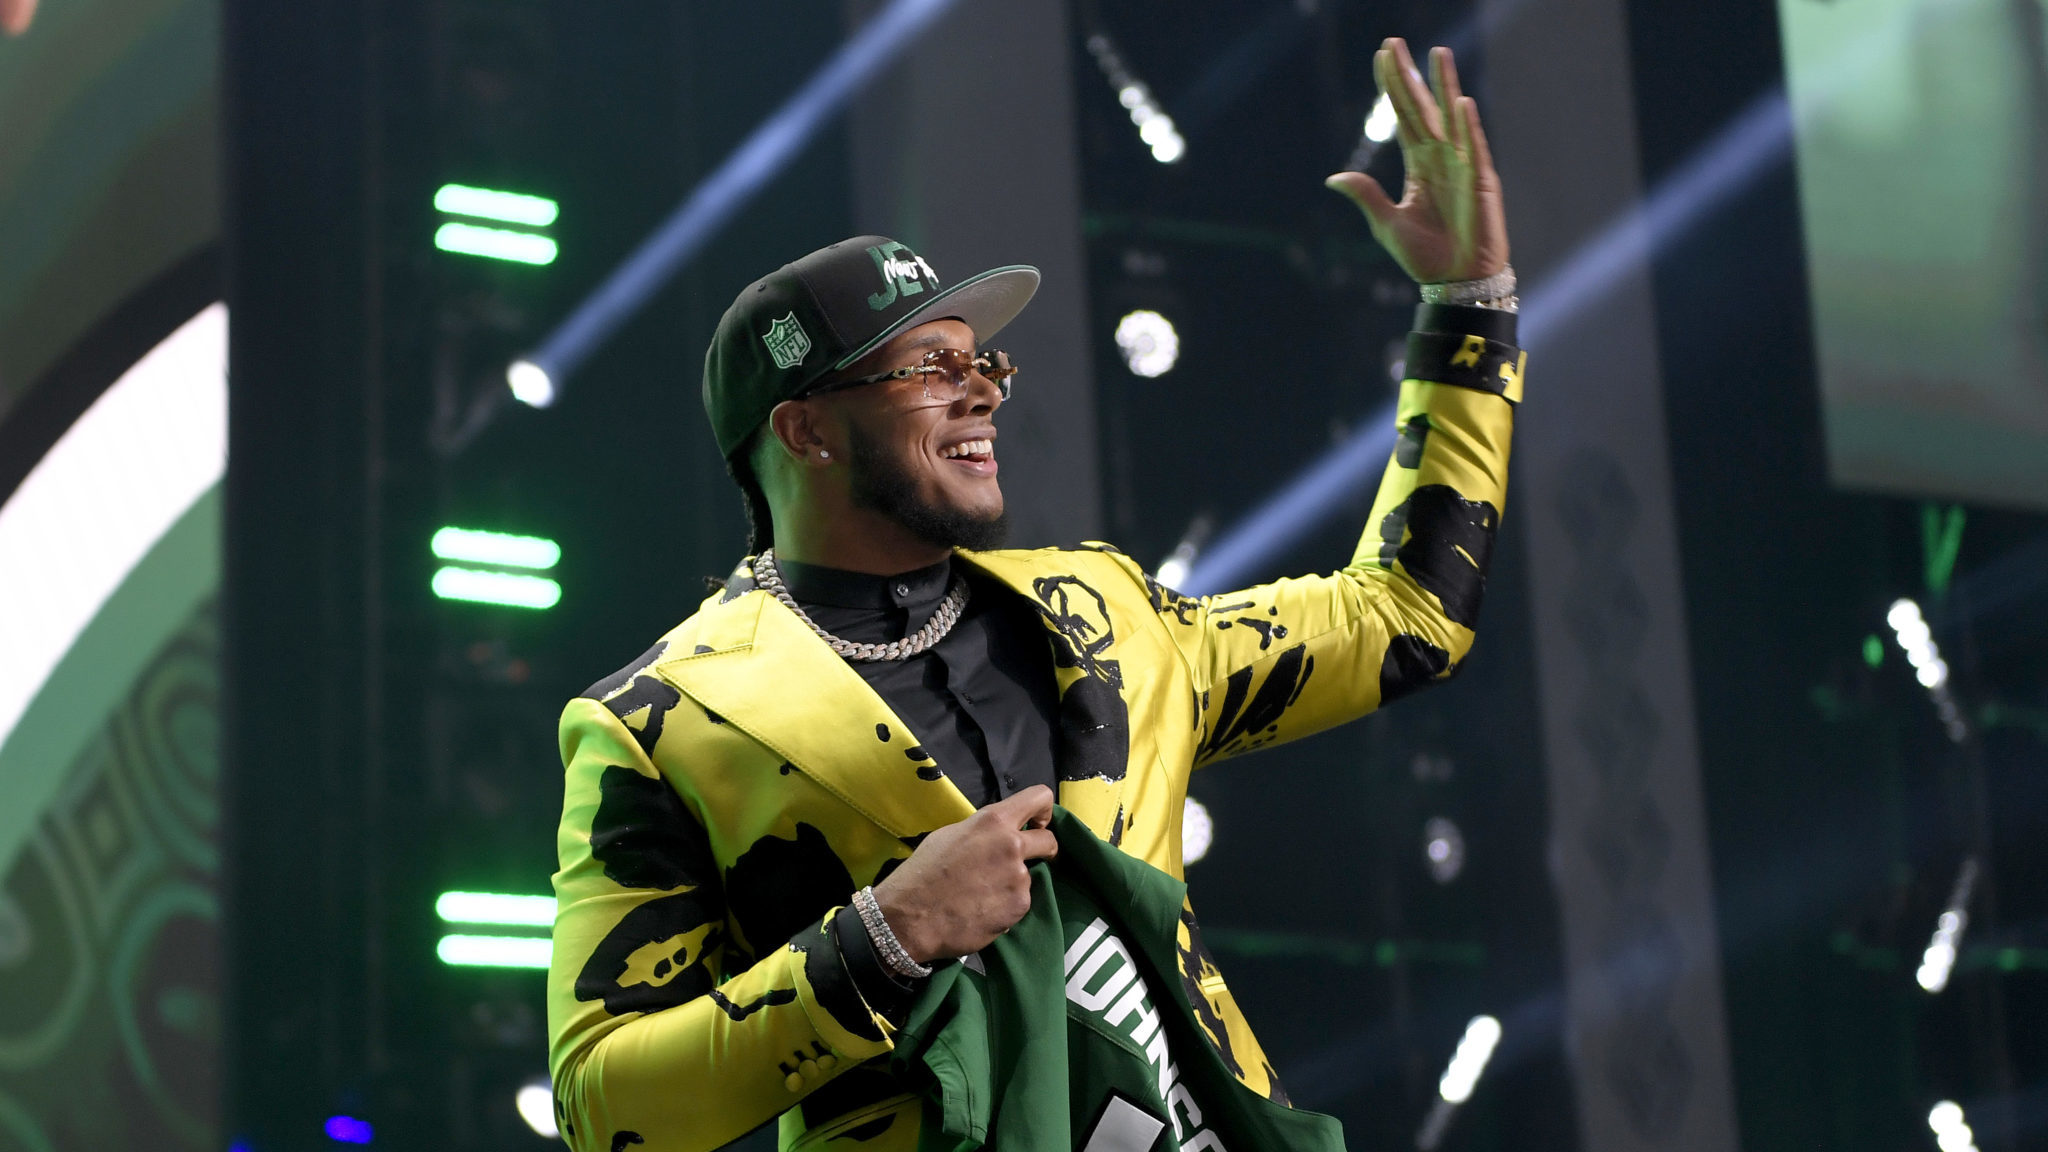 LAS VEGAS, NEVADA - APRIL 28: Jermaine Johnson II poses onstage after being selected 26th by the New York Jets during round one of the 2022 NFL Draft on April 28, 2022 in Las Vegas, Nevada.